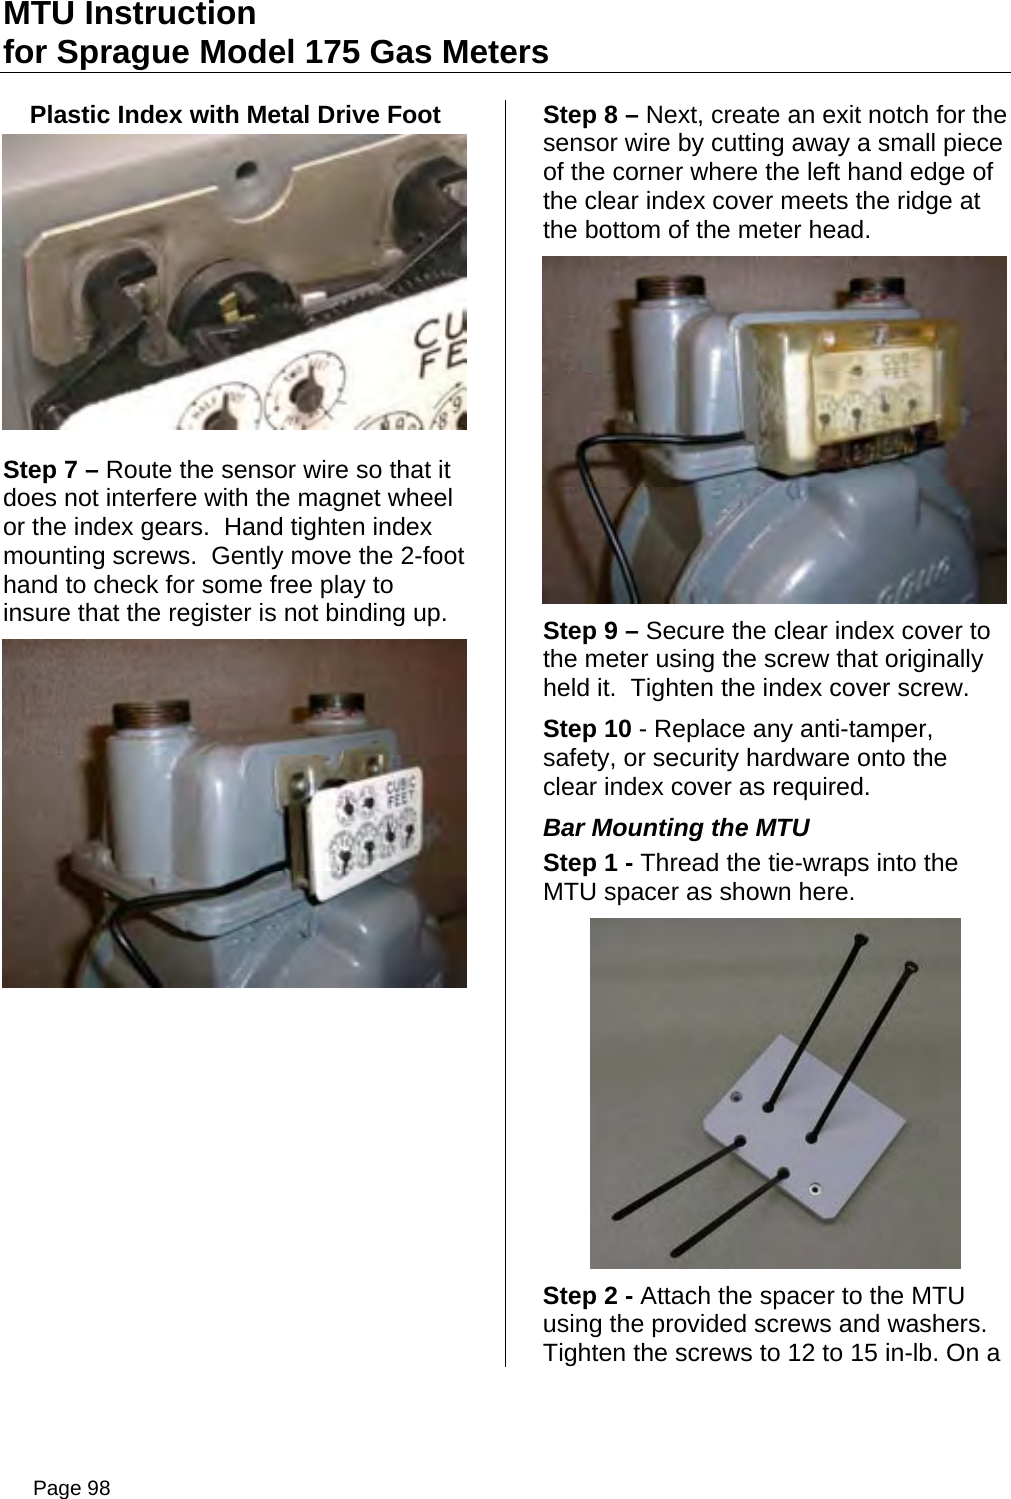 MTU Instruction for Sprague Model 175 Gas Meters Plastic Index with Metal Drive Foot  Step 7 – Route the sensor wire so that it does not interfere with the magnet wheel or the index gears.  Hand tighten index mounting screws.  Gently move the 2-foot hand to check for some free play to insure that the register is not binding up.  Step 8 – Next, create an exit notch for the sensor wire by cutting away a small piece of the corner where the left hand edge of the clear index cover meets the ridge at the bottom of the meter head.    Step 9 – Secure the clear index cover to the meter using the screw that originally held it.  Tighten the index cover screw. Step 10 - Replace any anti-tamper, safety, or security hardware onto the clear index cover as required. Bar Mounting the MTU Step 1 - Thread the tie-wraps into the MTU spacer as shown here.  Step 2 - Attach the spacer to the MTU using the provided screws and washers. Tighten the screws to 12 to 15 in-lb. On a Page 98